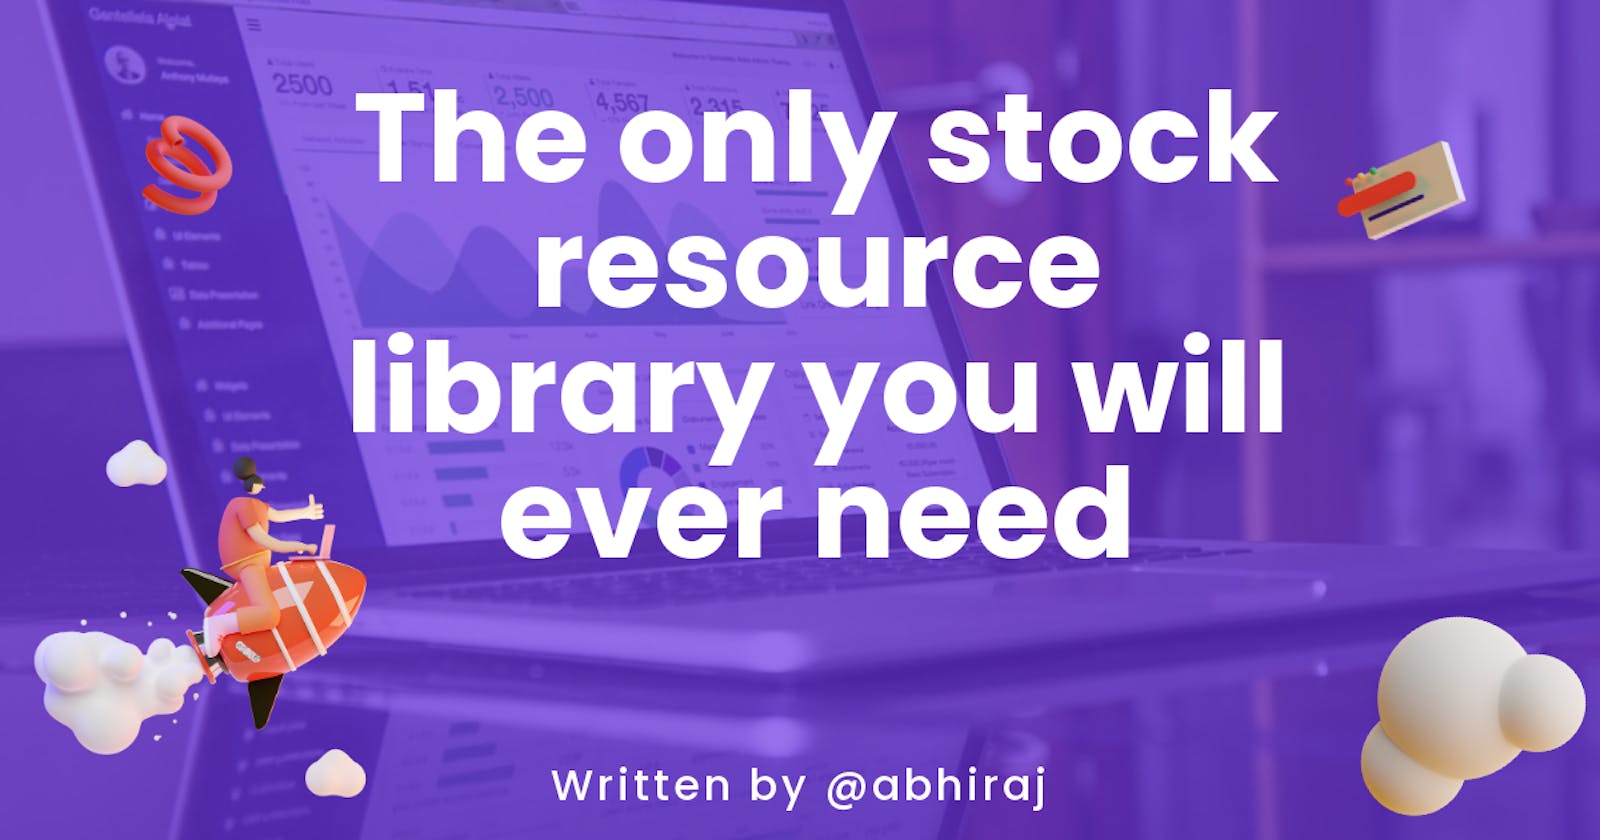 The Only stock resources library you will ever need.